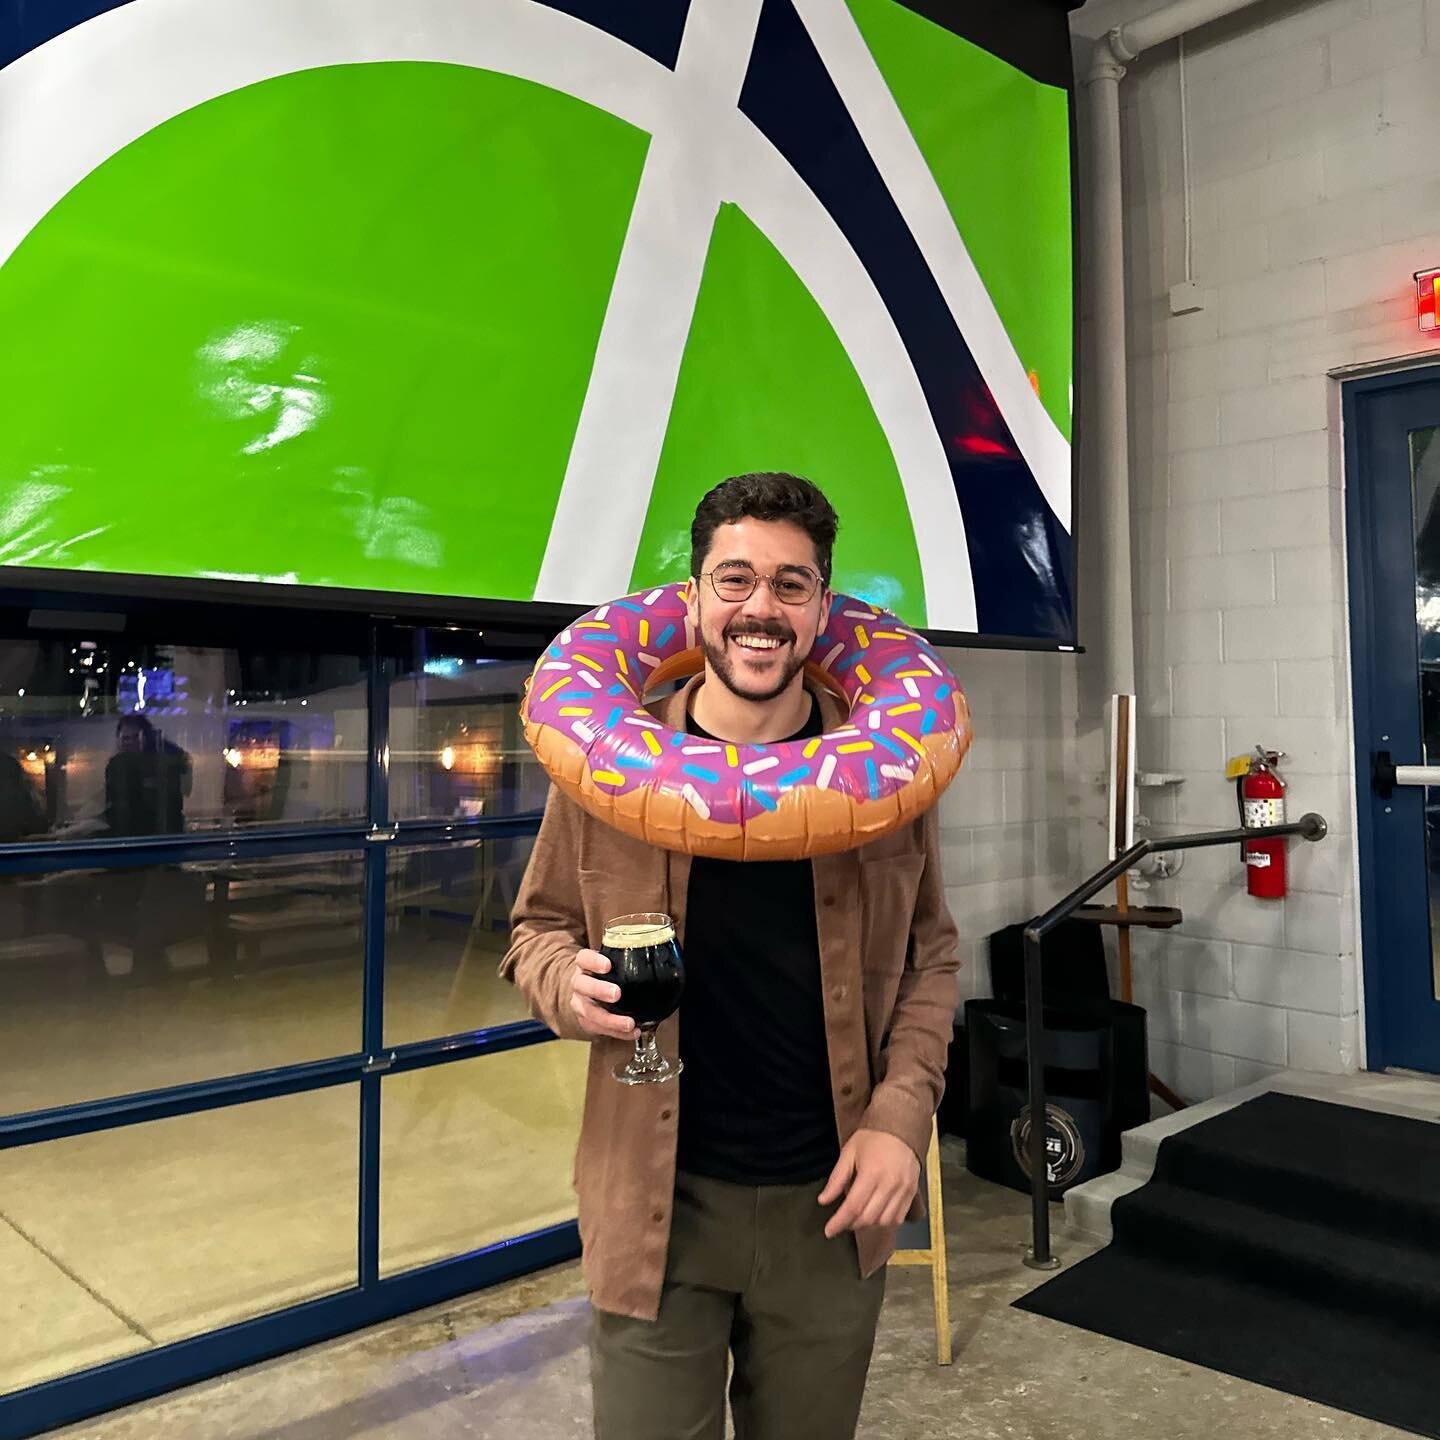 Guess who's making history as the first musician to play @singlespeedbrewingco Des Moines taproom? The guy with a donut around his neck! See you this Saturday from 11:30 AM - 1:30 PM for Zach's Mexican Donuts beer release party 🍩